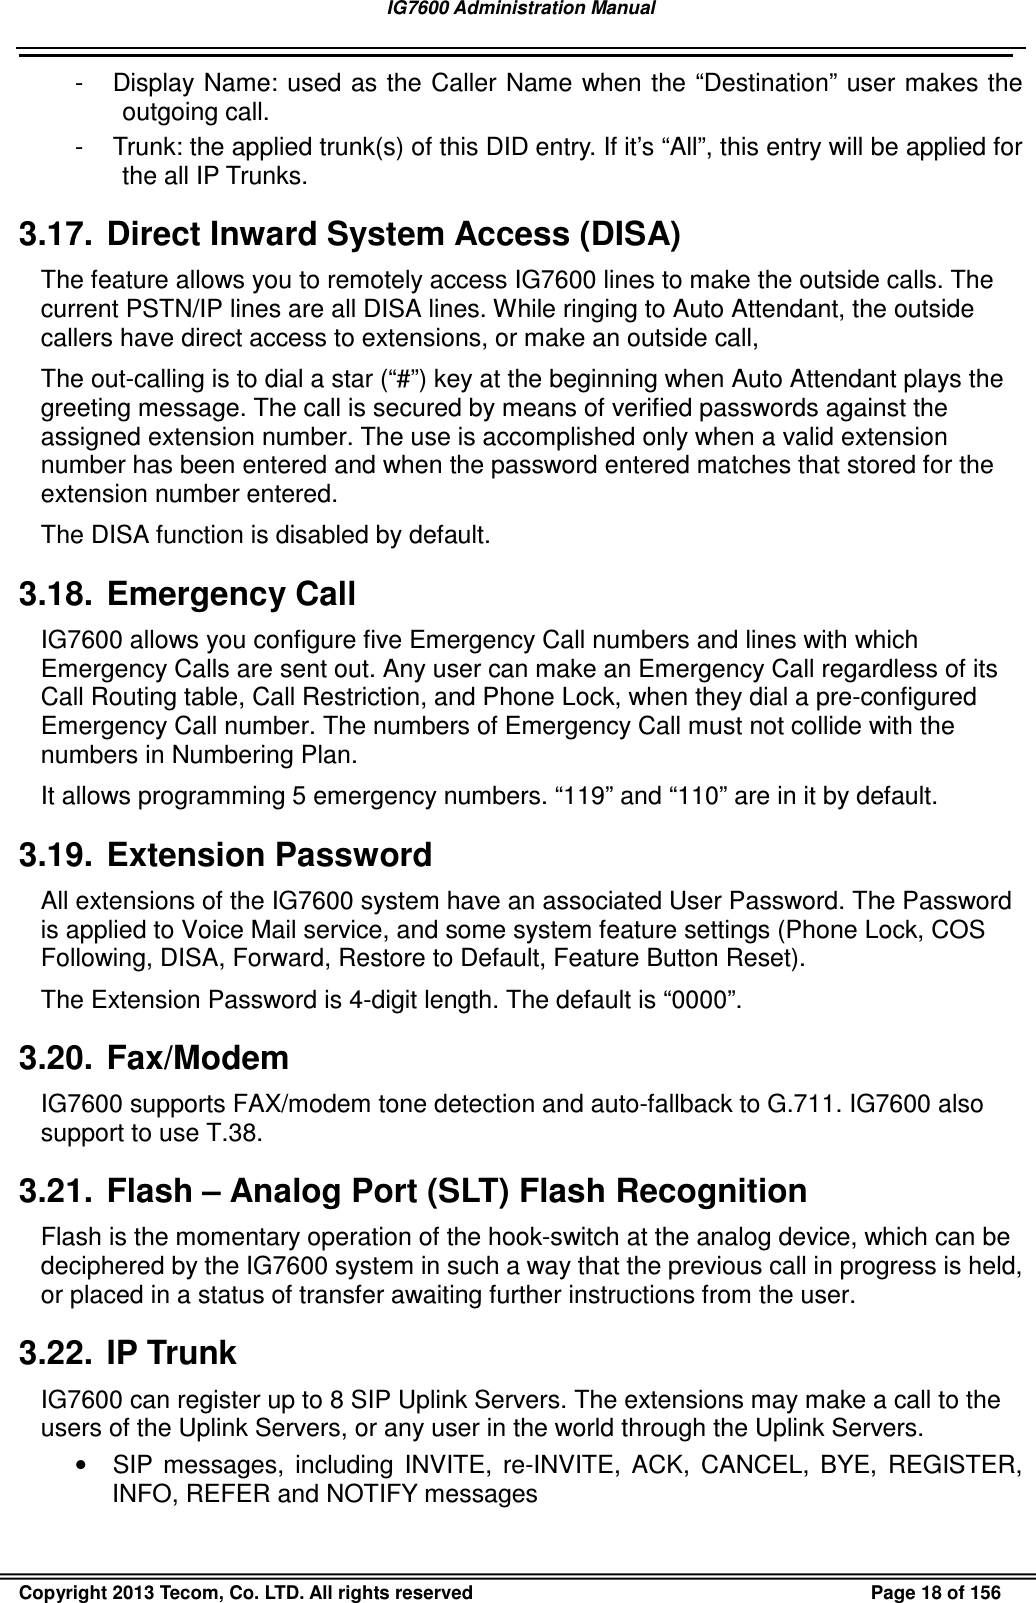 IG7600 Administration Manual                                                                                             Copyright 2013 Tecom, Co. LTD. All rights reserved  Page 18 of 156 -  Display Name:  used as the Caller Name when the “Destination” user makes the outgoing call. -  Trunk: the applied trunk(s) of this DID entry. If it’s “All”, this entry will be applied for the all IP Trunks. 3.17.  Direct Inward System Access (DISA) The feature allows you to remotely access IG7600 lines to make the outside calls. The current PSTN/IP lines are all DISA lines. While ringing to Auto Attendant, the outside callers have direct access to extensions, or make an outside call, The out-calling is to dial a star (“#”) key at the beginning when Auto Attendant plays the greeting message. The call is secured by means of verified passwords against the assigned extension number. The use is accomplished only when a valid extension number has been entered and when the password entered matches that stored for the extension number entered. The DISA function is disabled by default. 3.18.  Emergency Call IG7600 allows you configure five Emergency Call numbers and lines with which Emergency Calls are sent out. Any user can make an Emergency Call regardless of its Call Routing table, Call Restriction, and Phone Lock, when they dial a pre-configured Emergency Call number. The numbers of Emergency Call must not collide with the numbers in Numbering Plan. It allows programming 5 emergency numbers. “119” and “110” are in it by default. 3.19.  Extension Password All extensions of the IG7600 system have an associated User Password. The Password is applied to Voice Mail service, and some system feature settings (Phone Lock, COS Following, DISA, Forward, Restore to Default, Feature Button Reset). The Extension Password is 4-digit length. The default is “0000”. 3.20.  Fax/Modem IG7600 supports FAX/modem tone detection and auto-fallback to G.711. IG7600 also support to use T.38. 3.21.  Flash – Analog Port (SLT) Flash Recognition Flash is the momentary operation of the hook-switch at the analog device, which can be deciphered by the IG7600 system in such a way that the previous call in progress is held, or placed in a status of transfer awaiting further instructions from the user. 3.22.  IP Trunk IG7600 can register up to 8 SIP Uplink Servers. The extensions may make a call to the users of the Uplink Servers, or any user in the world through the Uplink Servers. •  SIP  messages,  including  INVITE,  re-INVITE,  ACK,  CANCEL,  BYE,  REGISTER, INFO, REFER and NOTIFY messages 